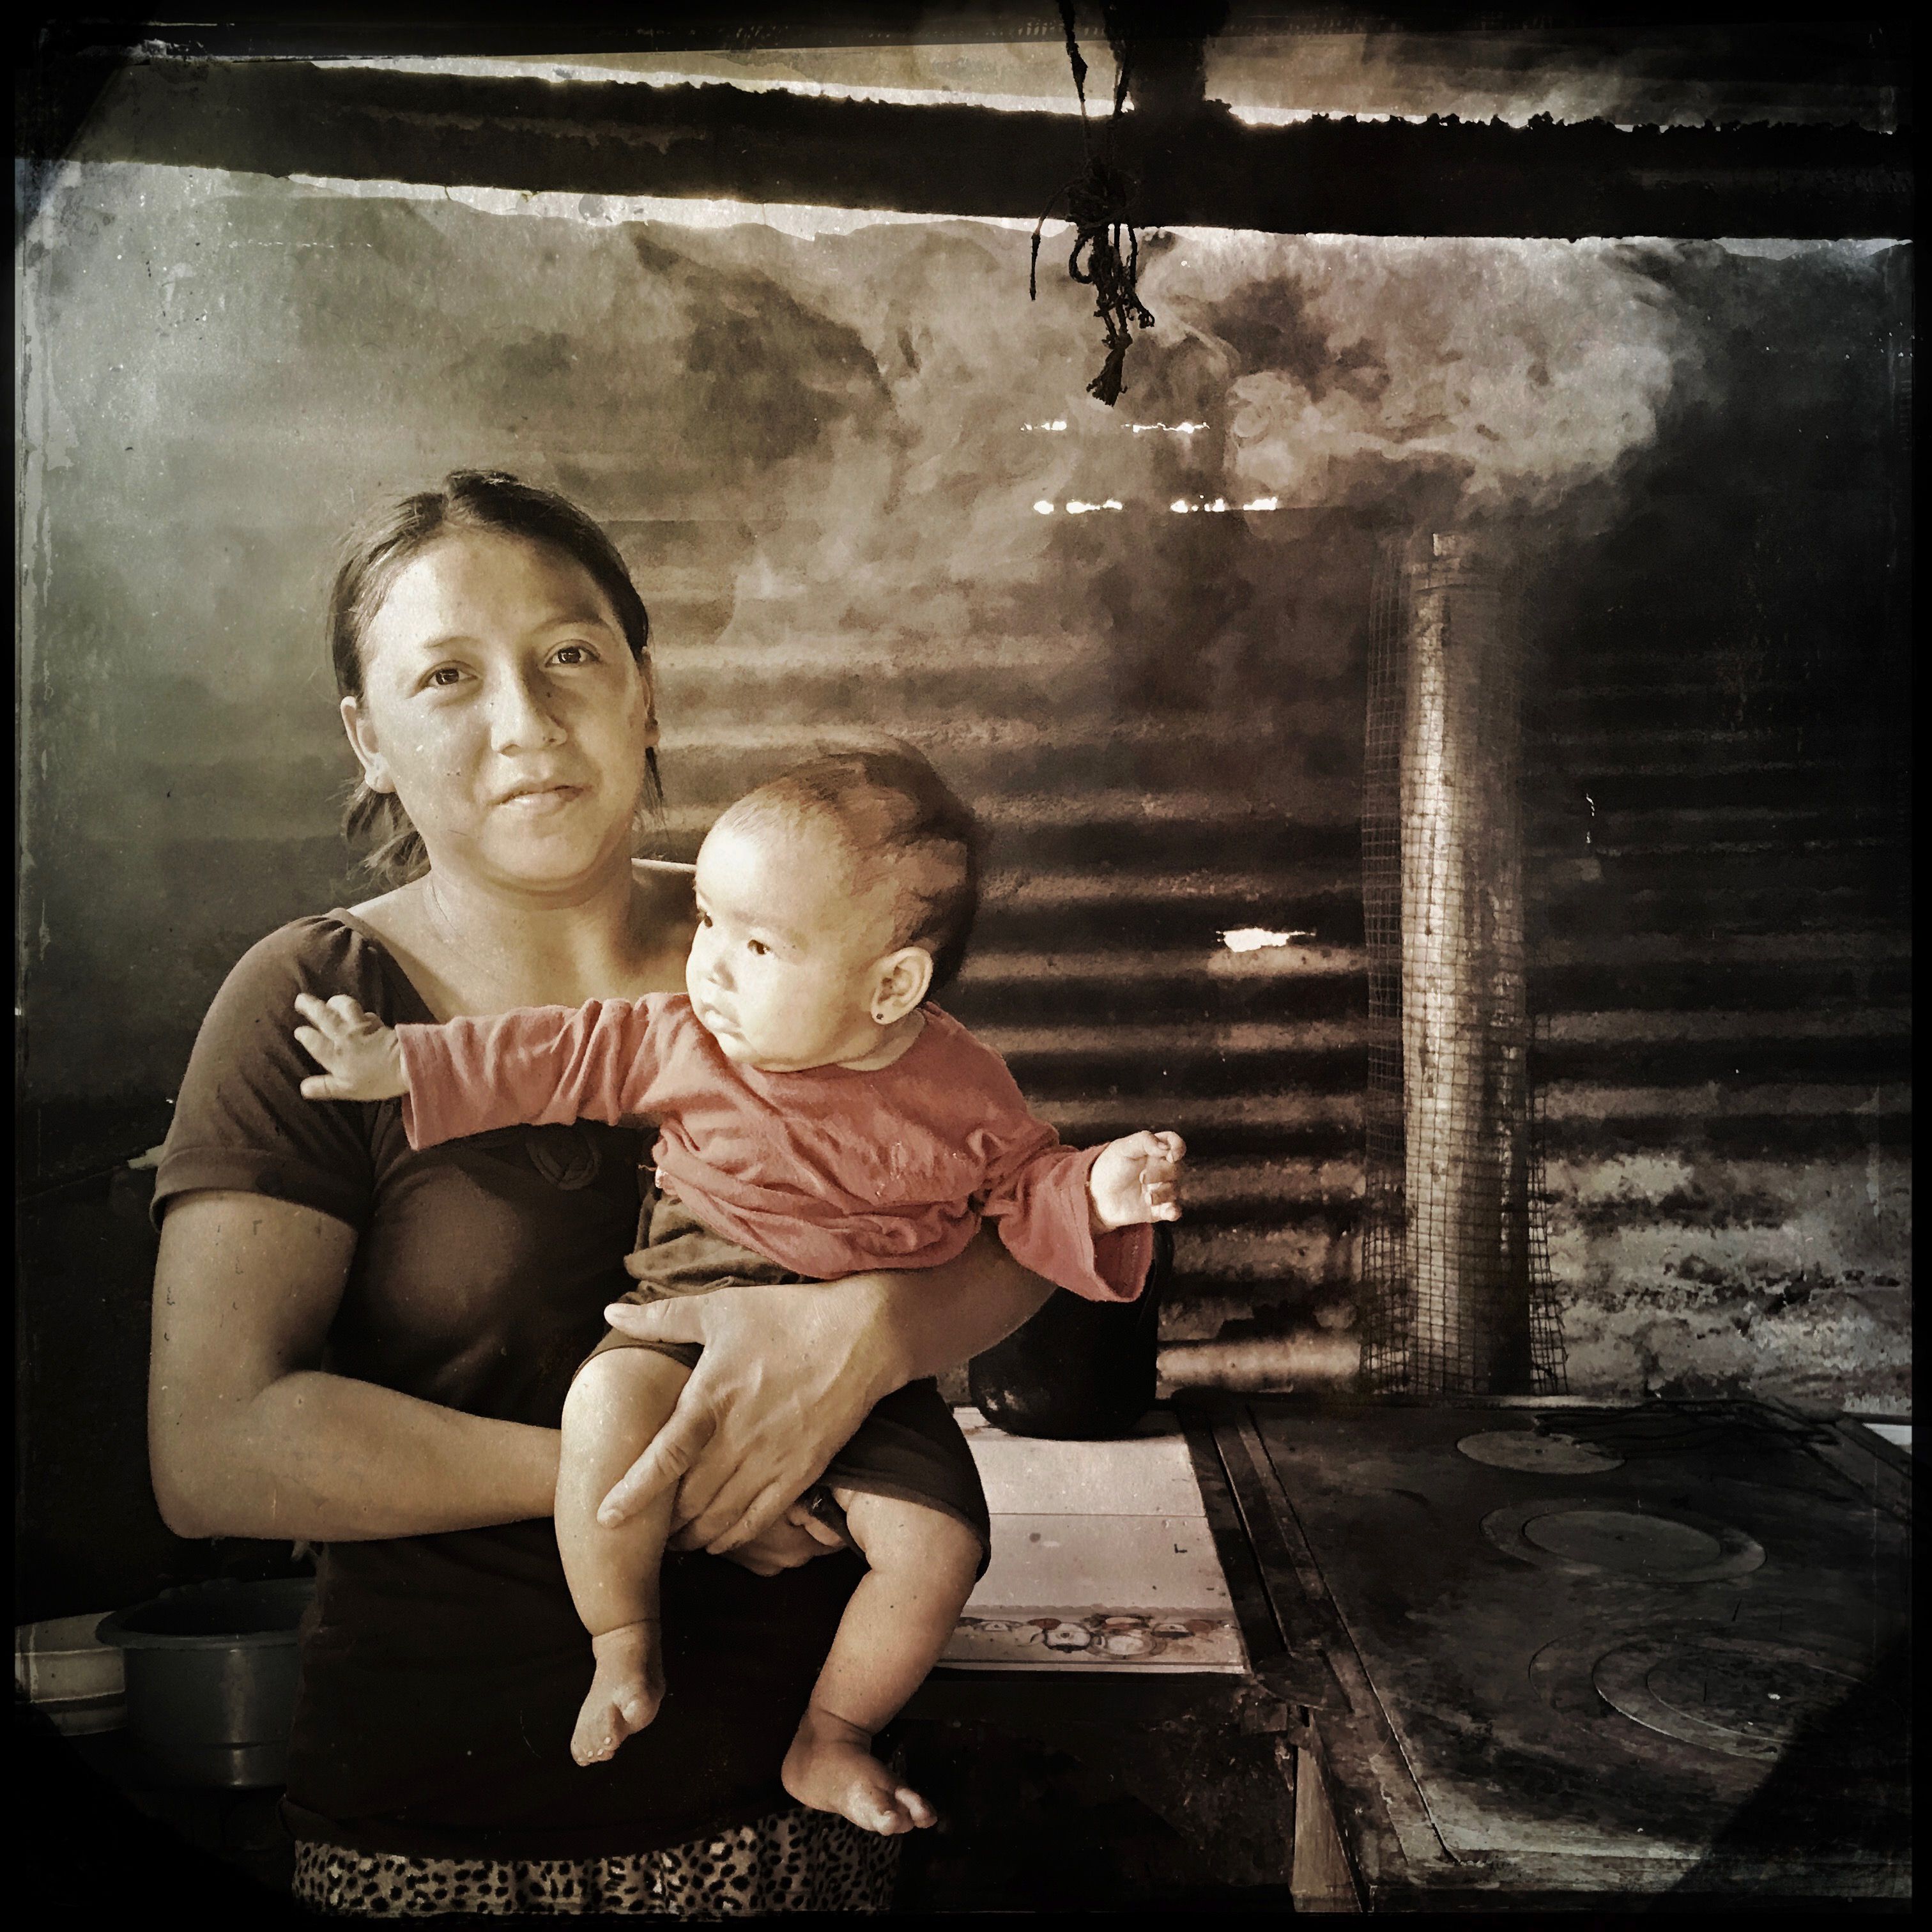 In Las Brisas, Guatemala, Yeni Contreras, 24, holds her four-month-old daughter Heidi. When she received an efficient wood-burning stove from the aid group Stove Team International, she carried it to her kitchen herself, piece by piece. She loves the stove, but, like many of her neighbors, she is afraid to cut a hole in the roof for the chimney, fearing the chimney will be damaged during the rainy season. Photo by Lynn Johnson. Guatemala, 2017.